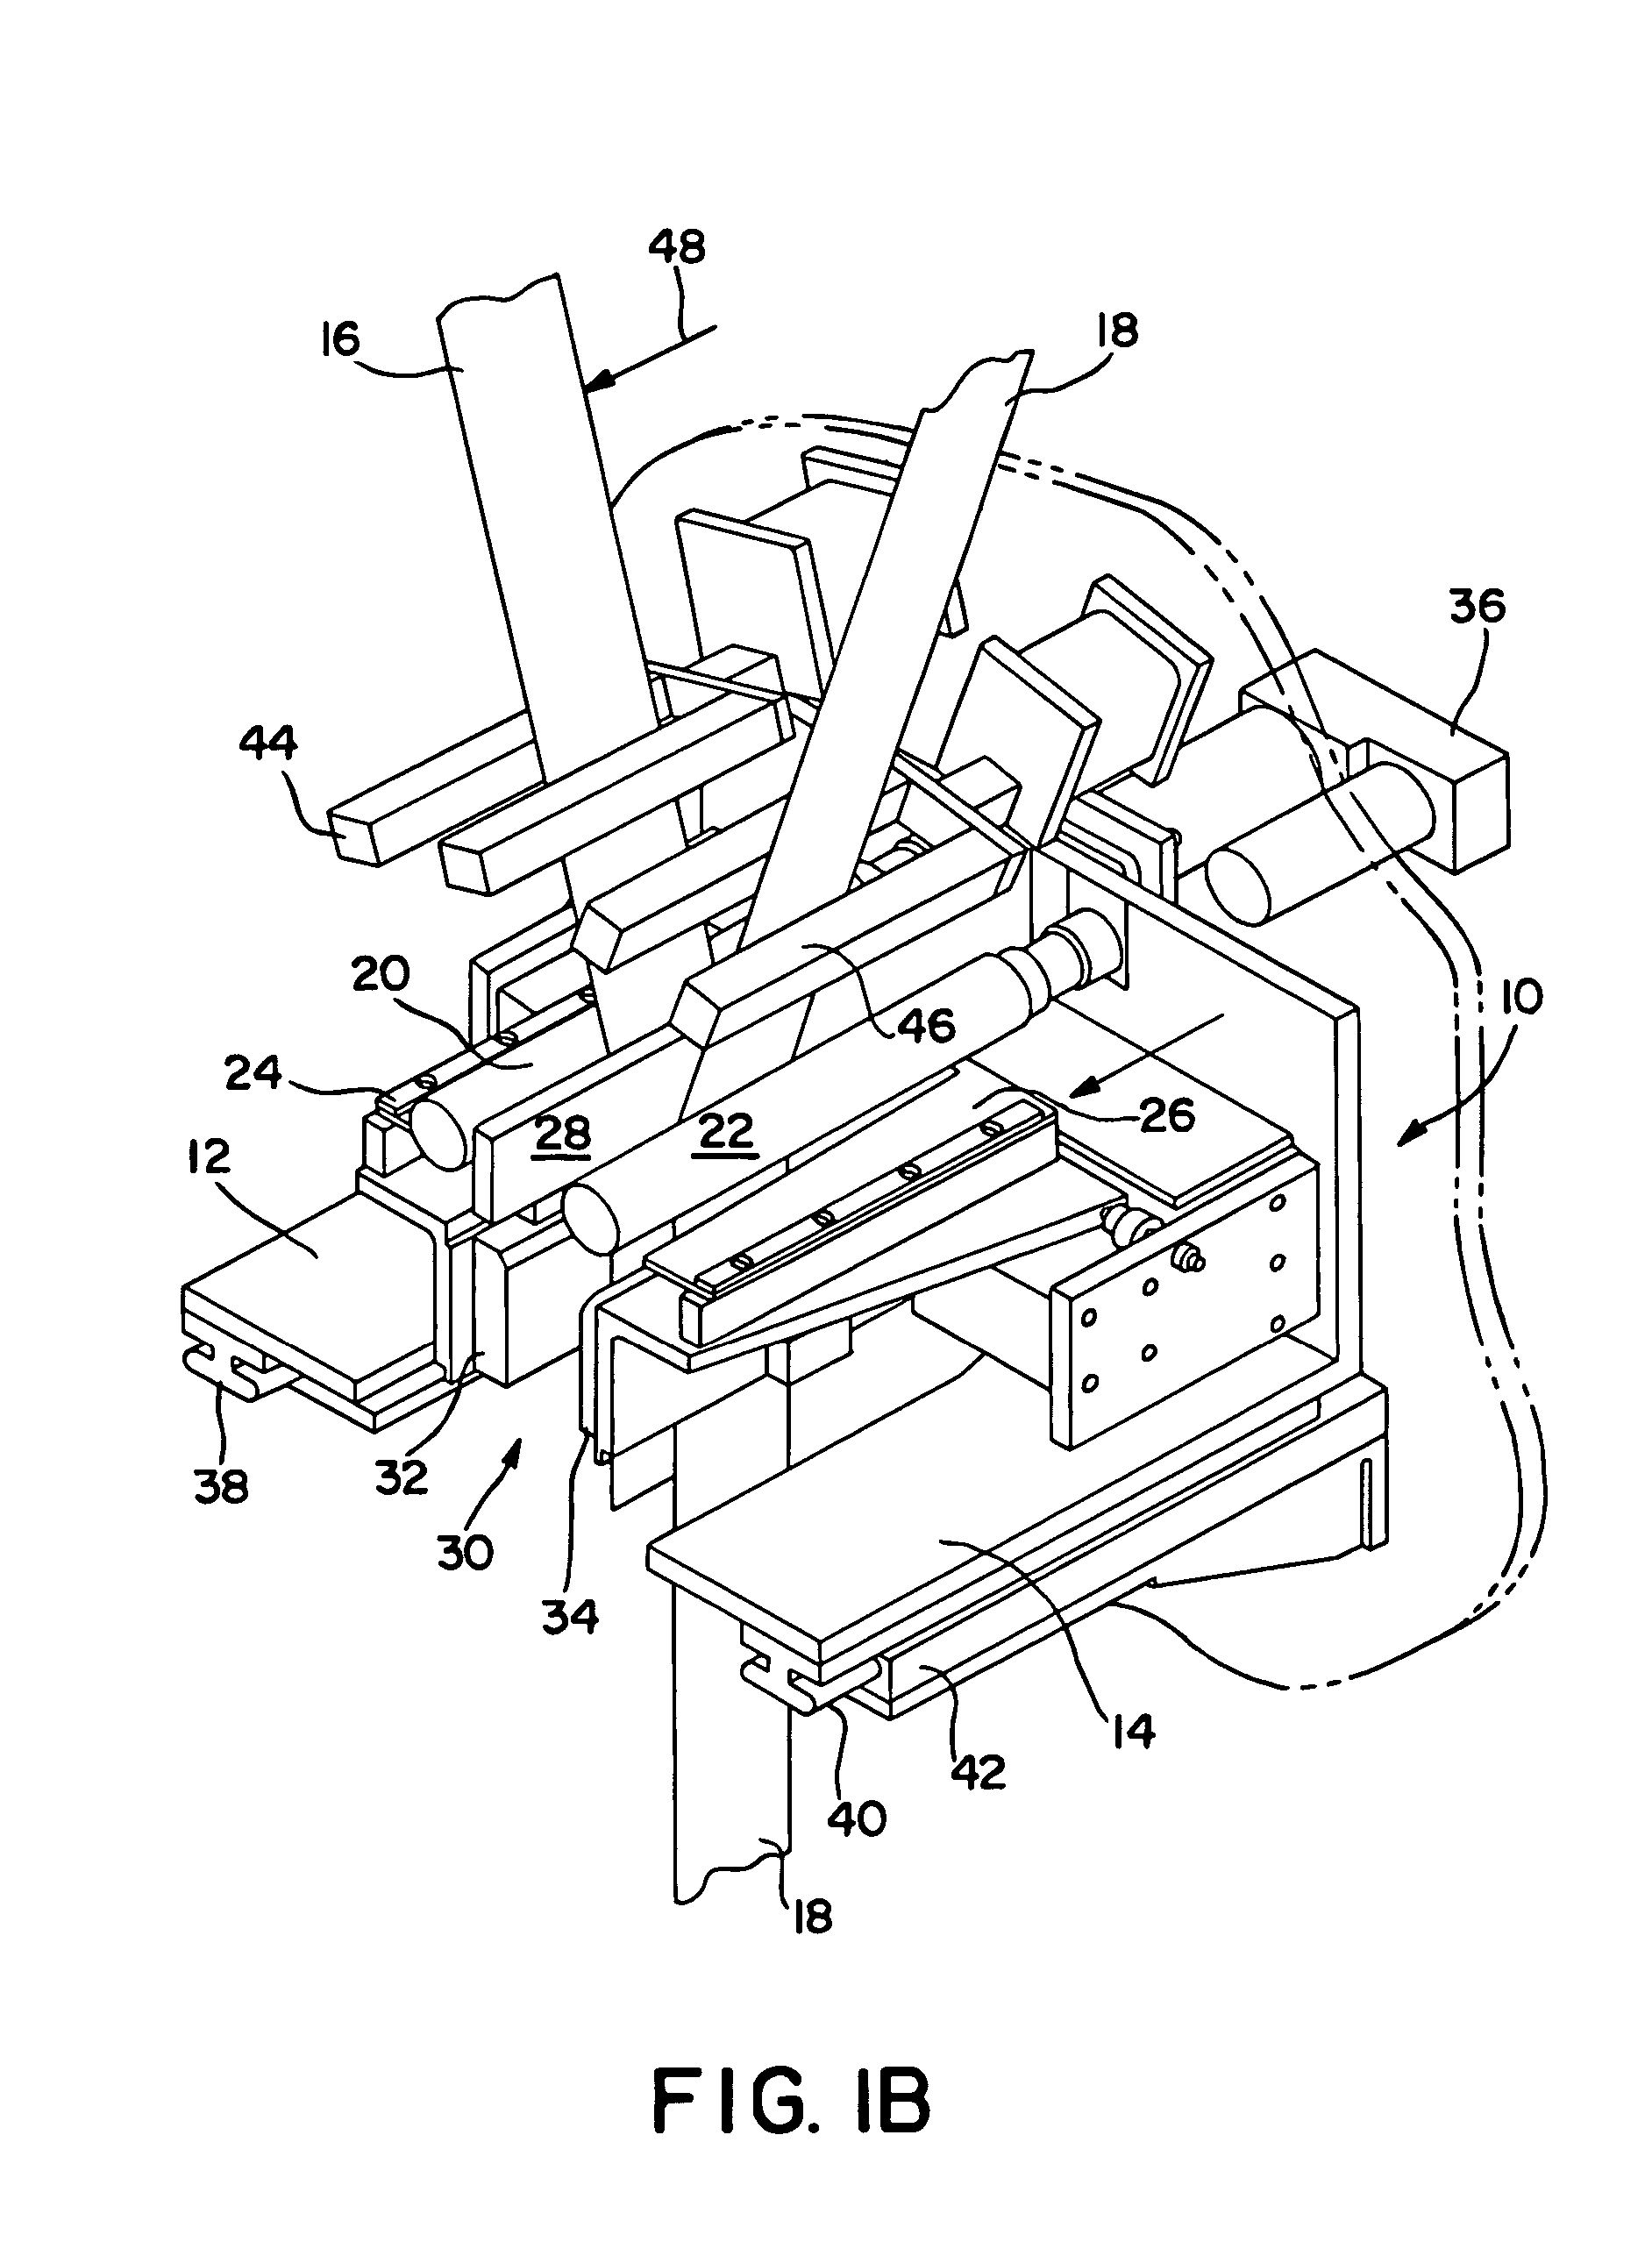 Apparatus and process for aligning materials during a splice